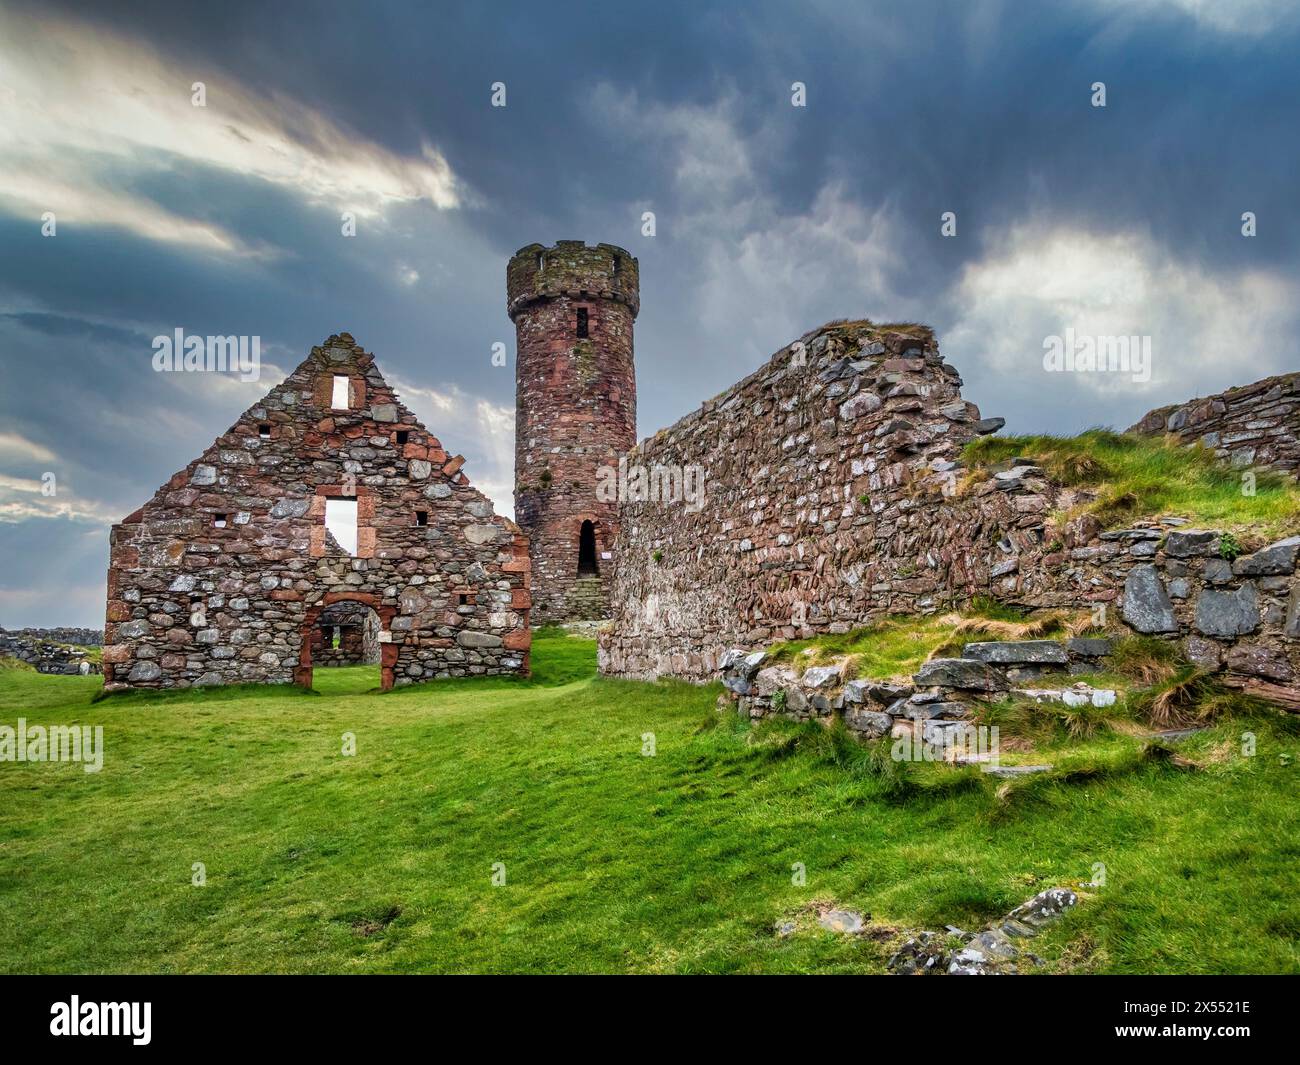 General scenic image at the historic 12th century Peel Castle and Abbey on the west coast of the Isle of Man, looking towards the defensive tower. Stock Photo